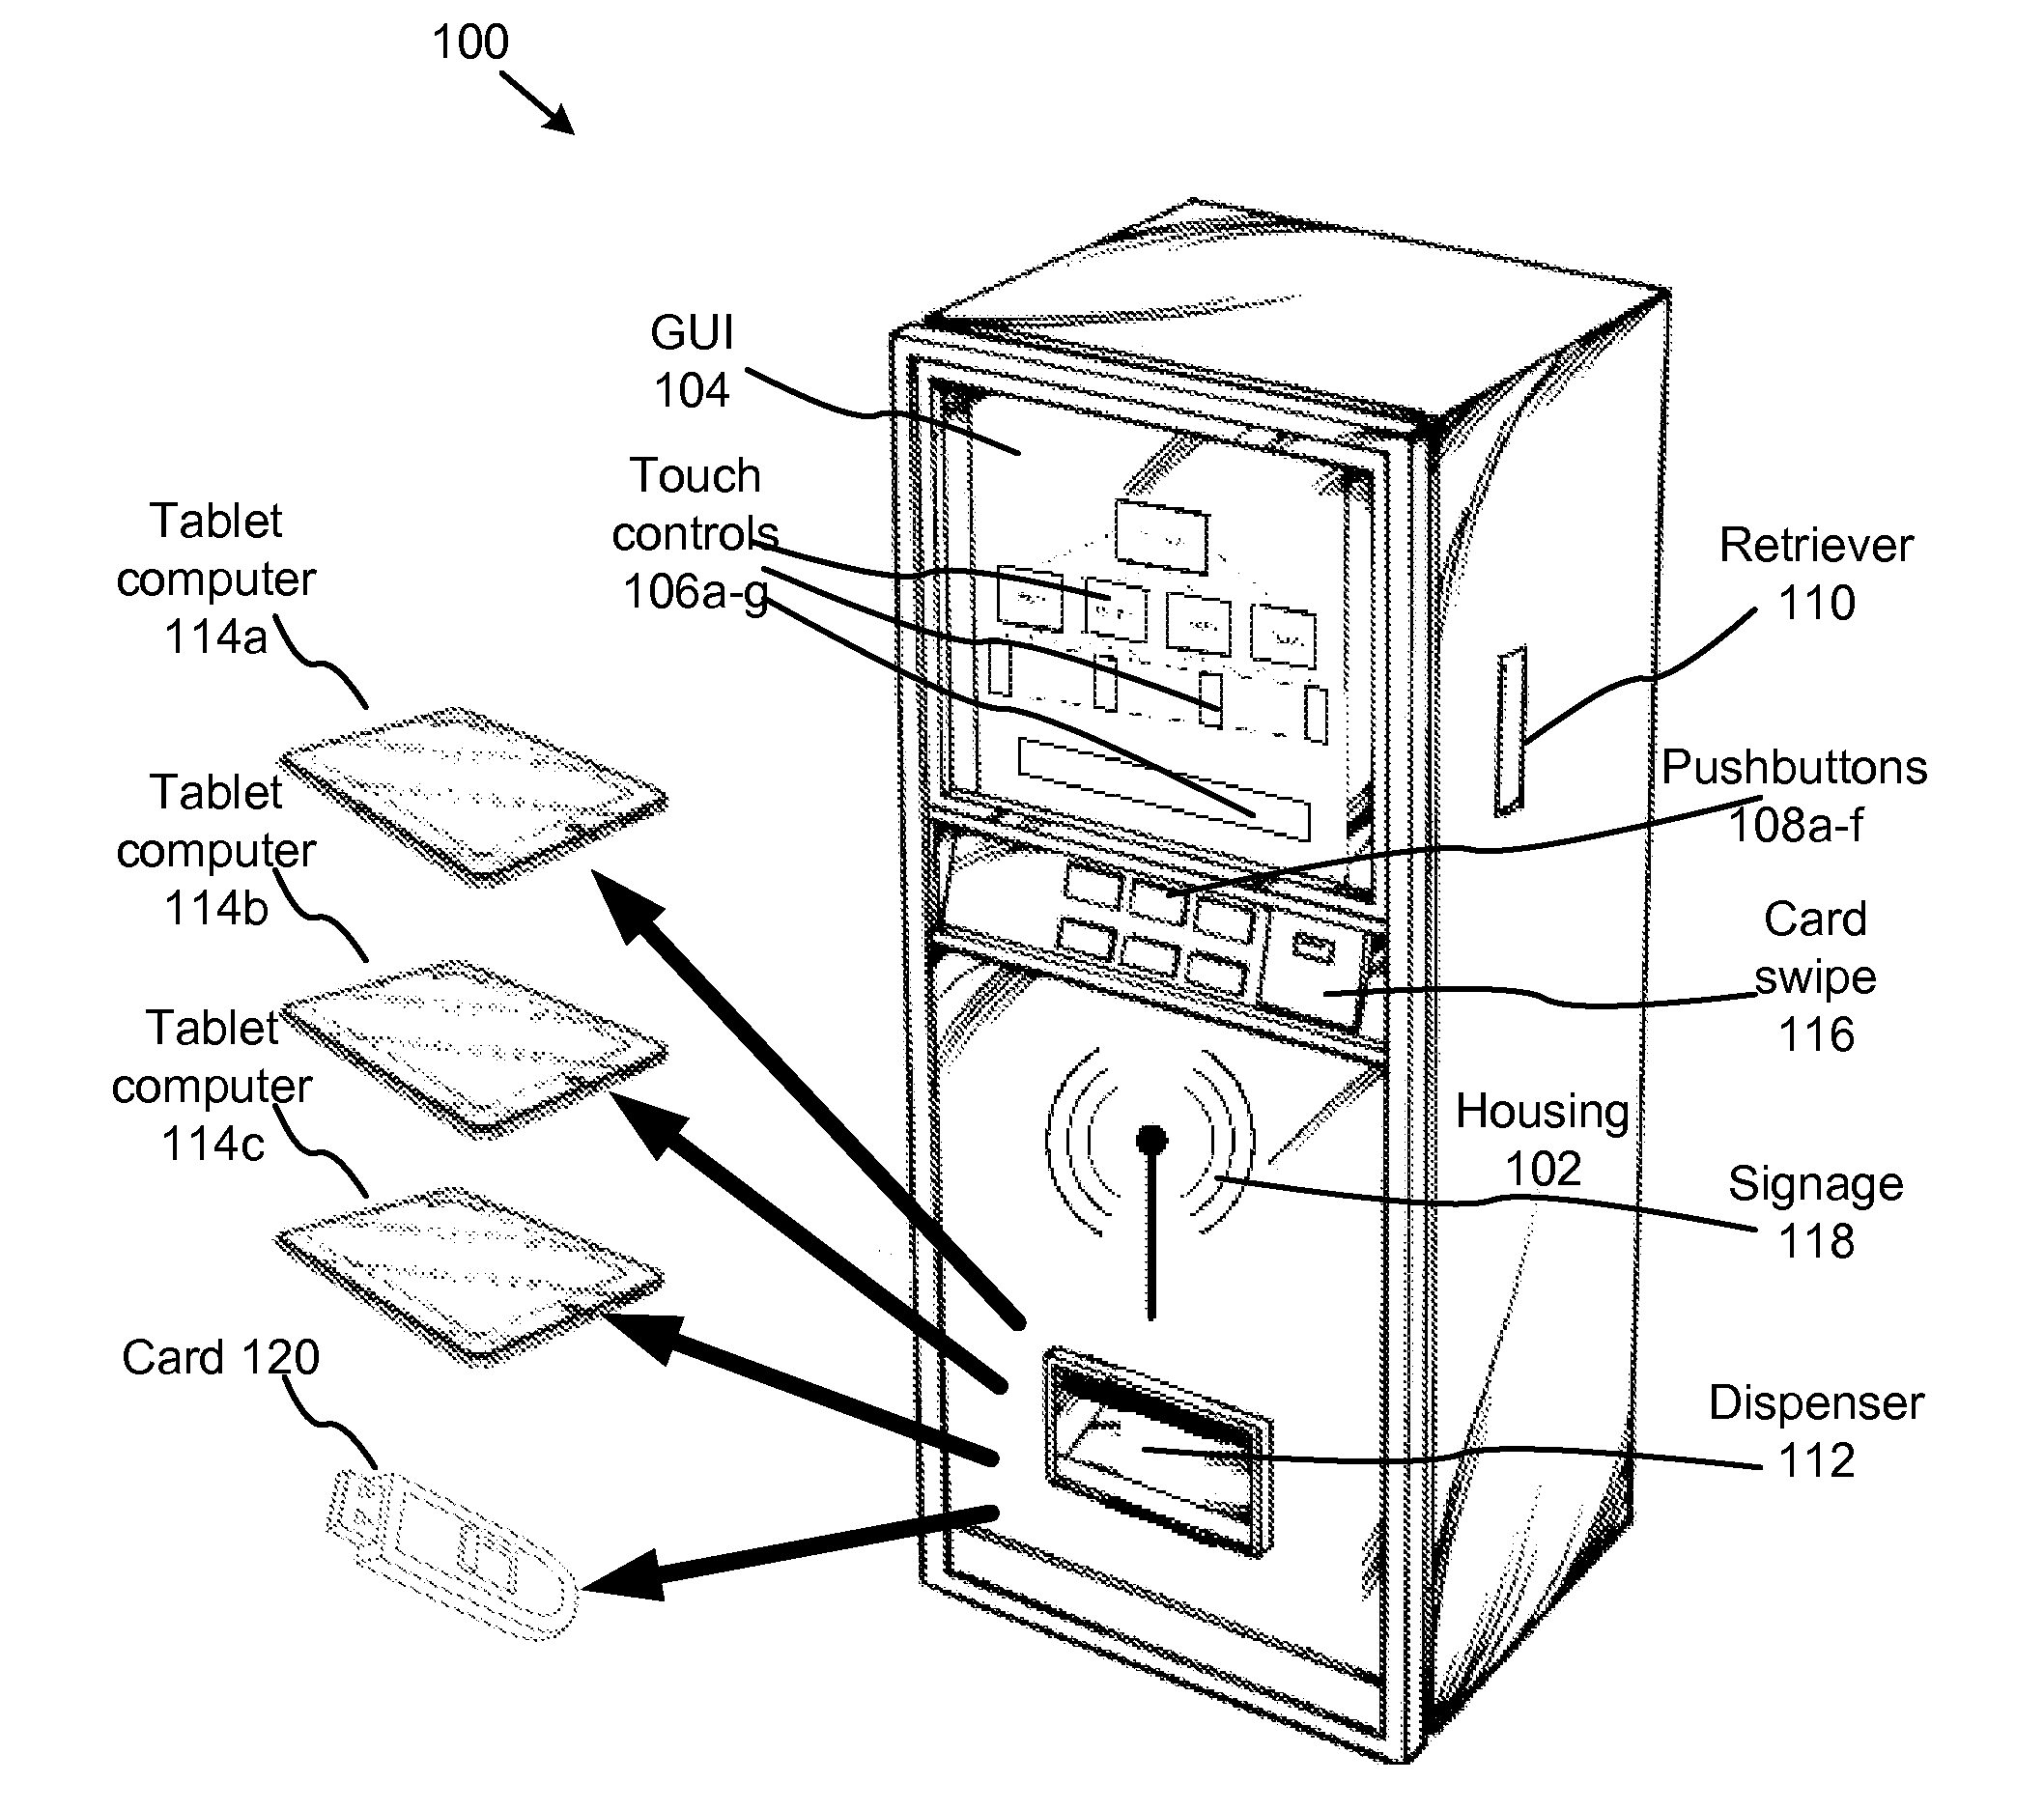 Apparatus for dispensing rented wireless devices for internet access via a local area network (LAN)